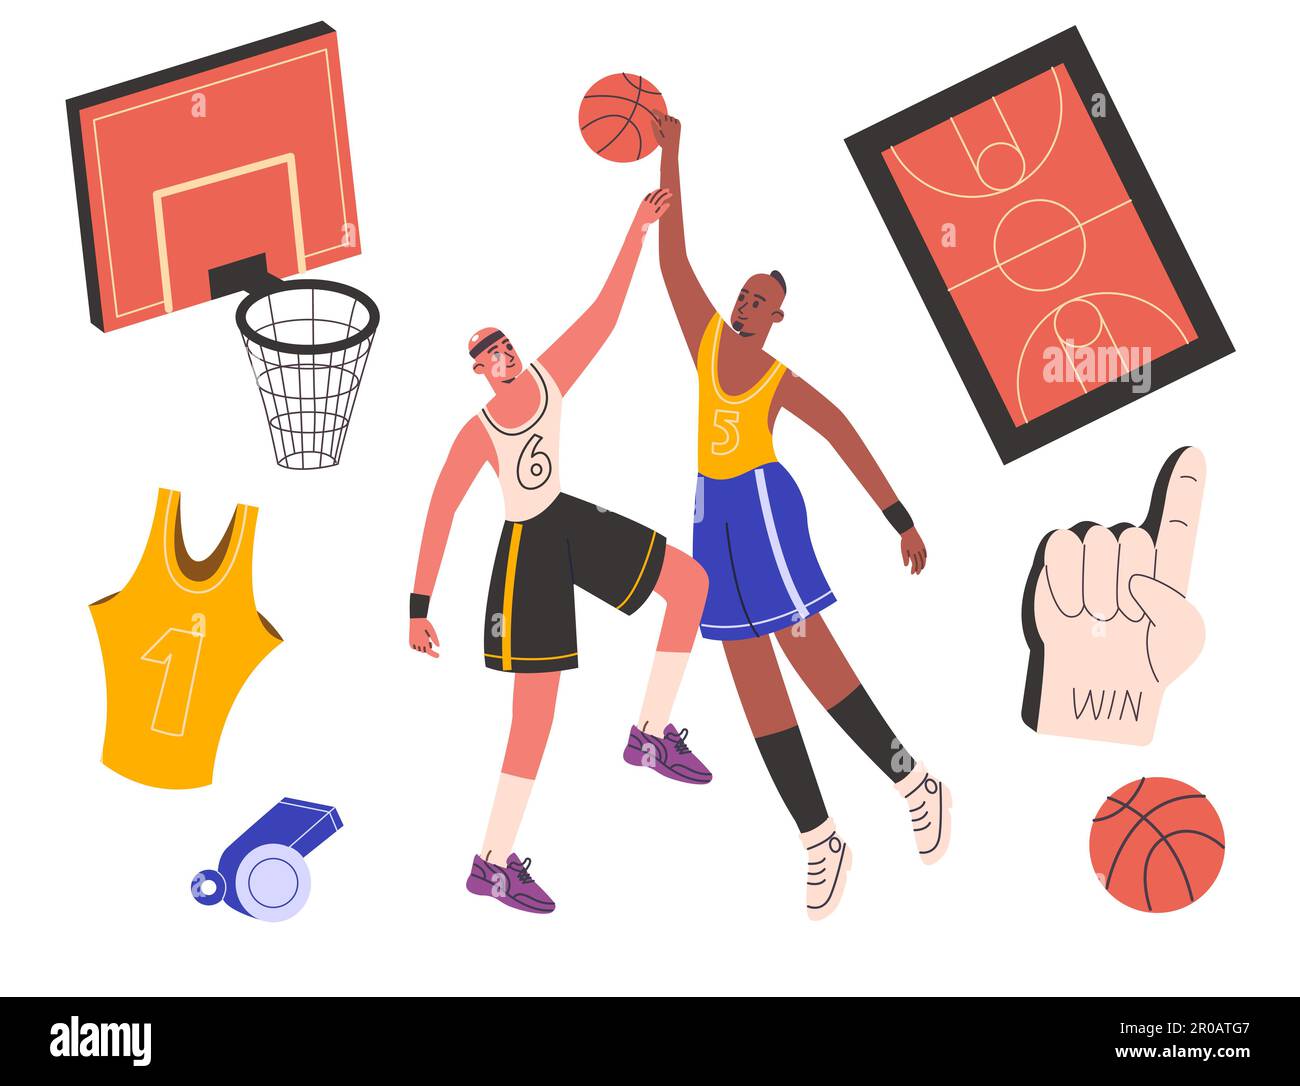 Basketball elements. Cartoon athletes characters fighting for ball. Professional sports equipment. Playground with basket. Whistle athletic uniform Stock Vector